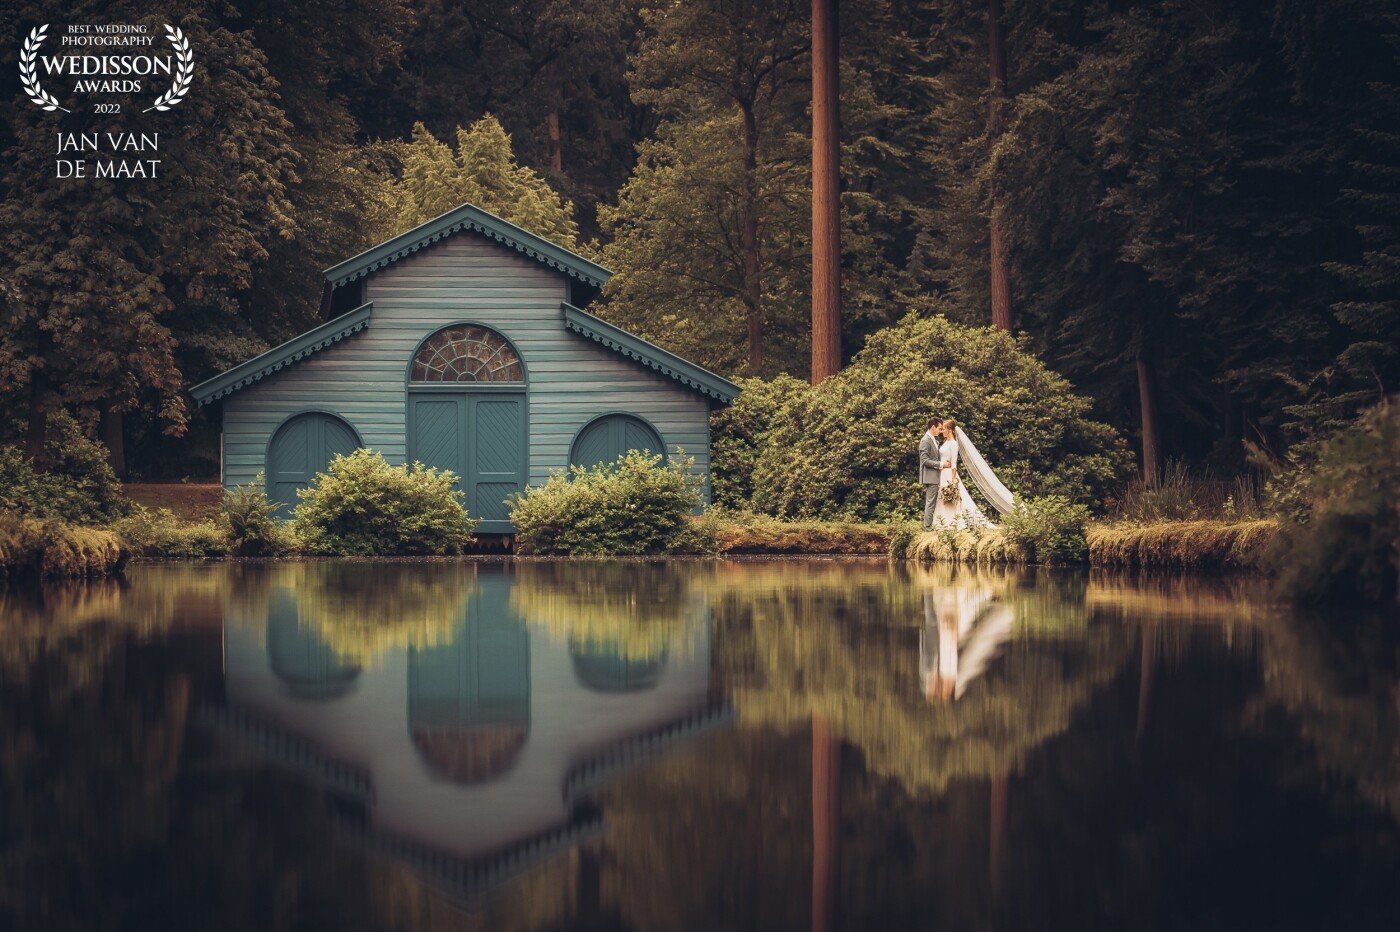 When I walked together with the couple through the park I discoverd this beautiful boathouse. Since it was early in the morning the water was still quiet and created a beautiful reflection. I placed the couple next to the boathouse, walked back and took this image!